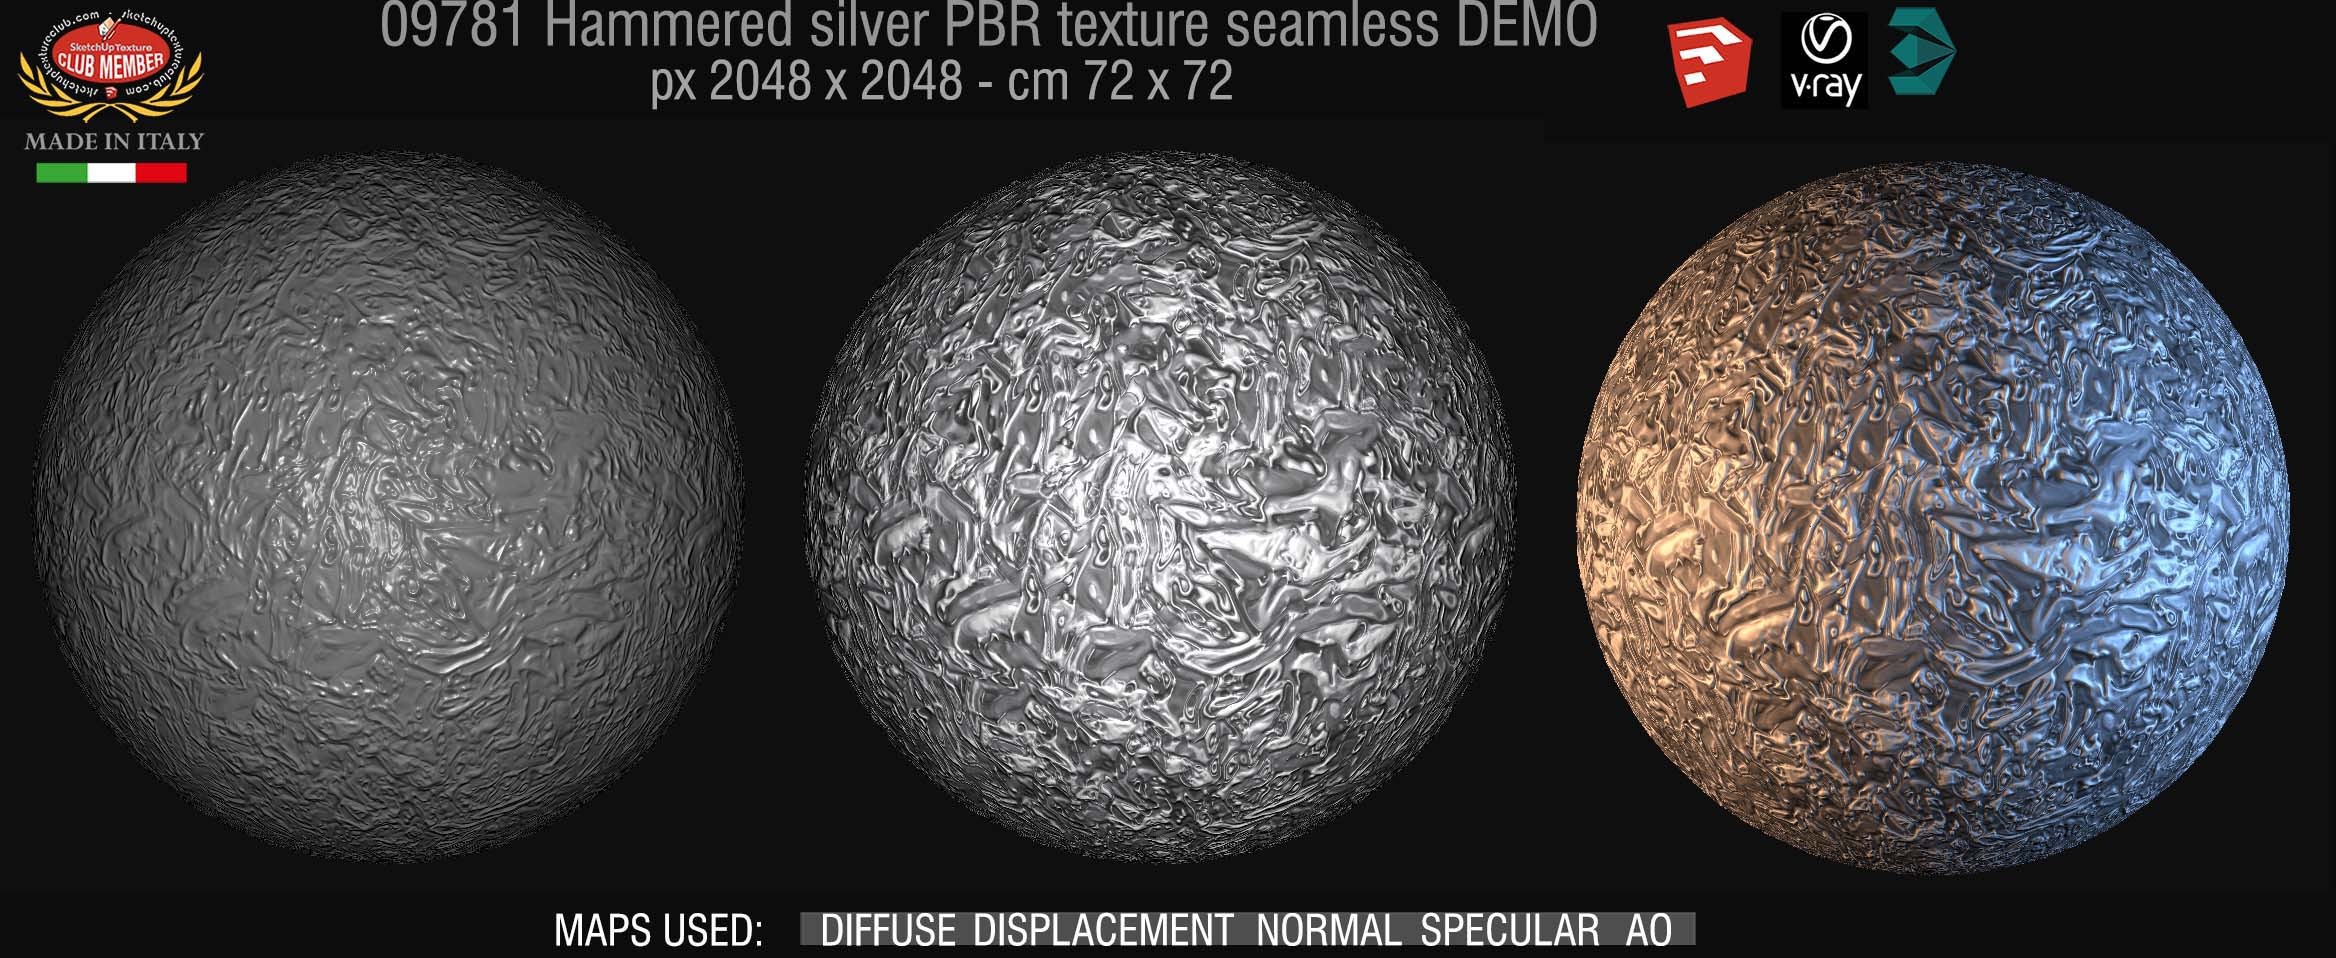 09781 Hammered silver metal PBR texture seamless DEMO